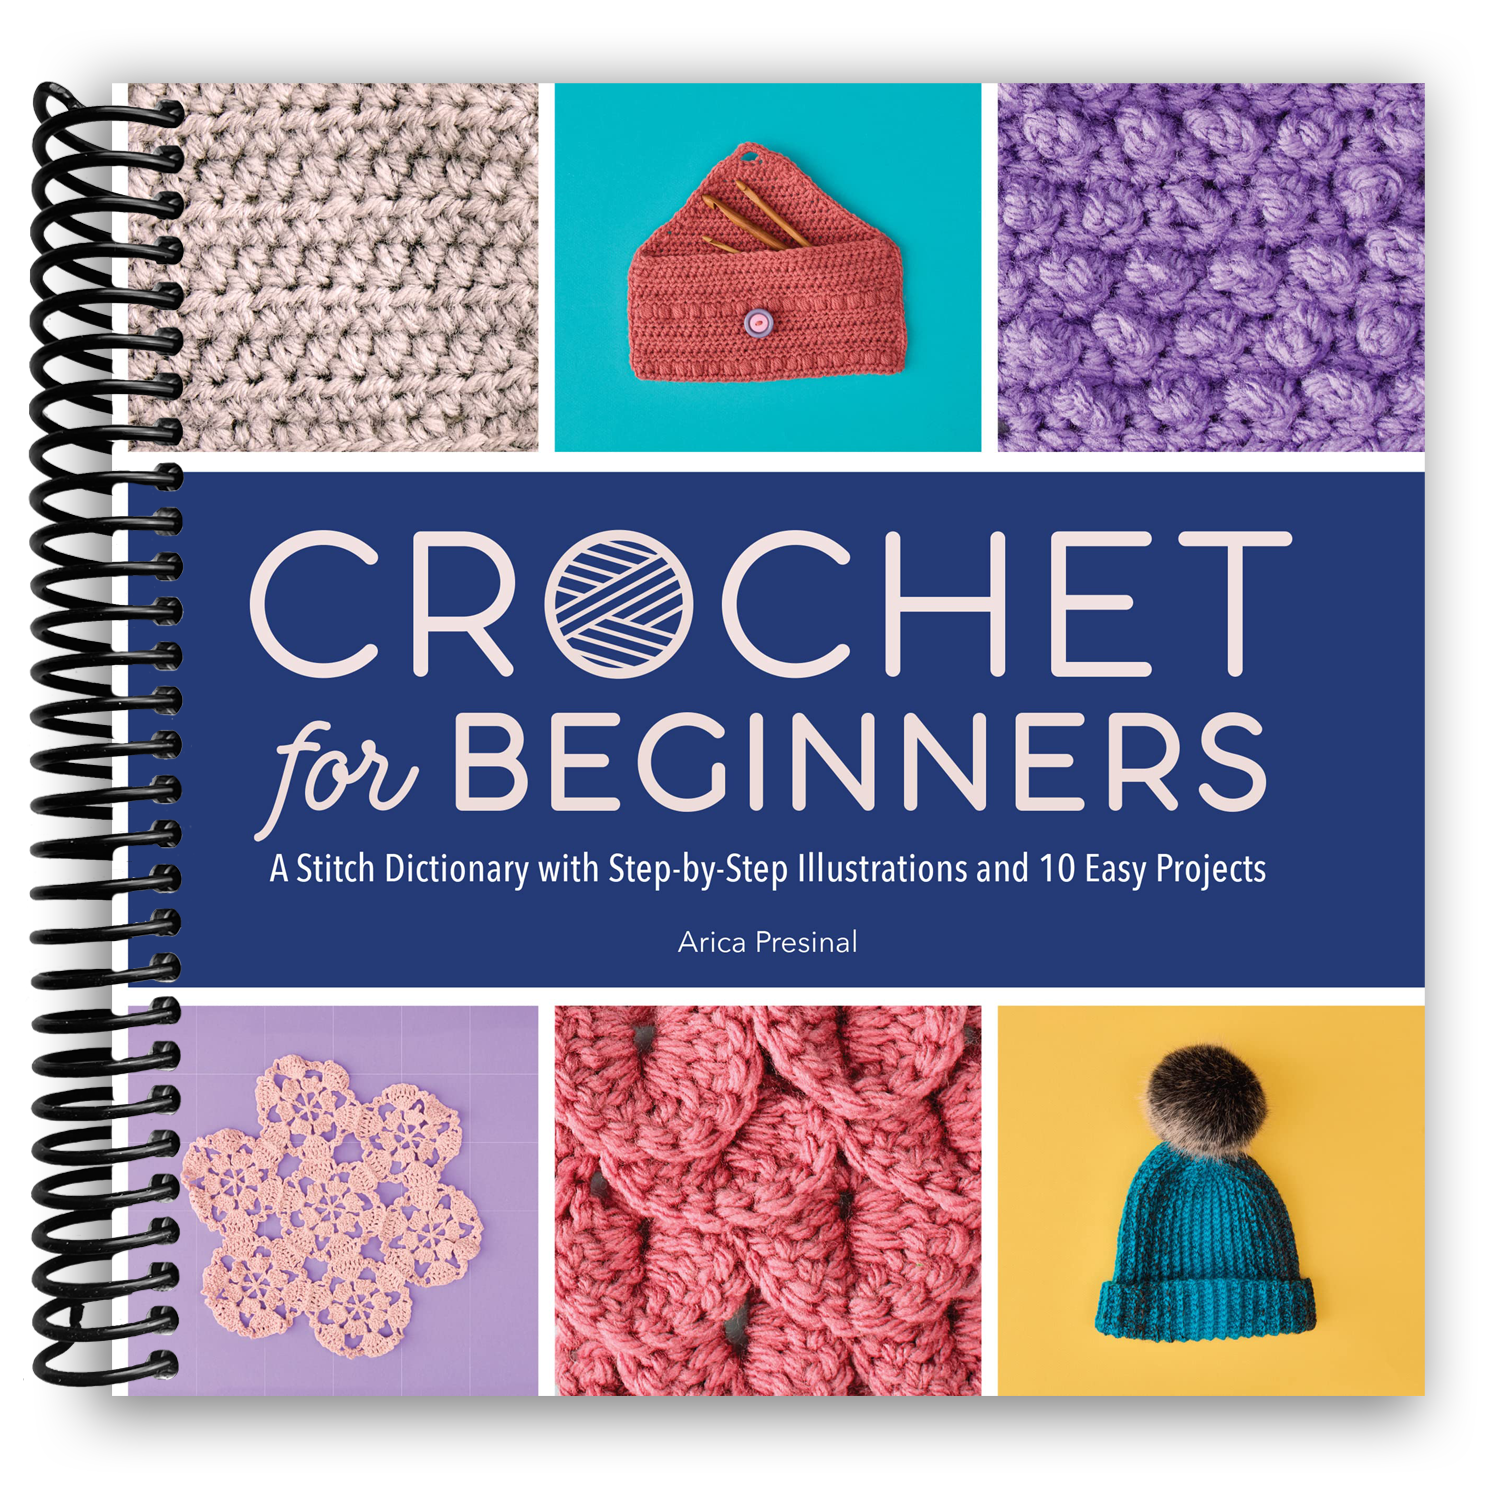 Crochet Amigurumi for Every Occasion: 21 Easy Projects to Celebrate Life's Happy Moments (The Woobles Crochet) [Book]